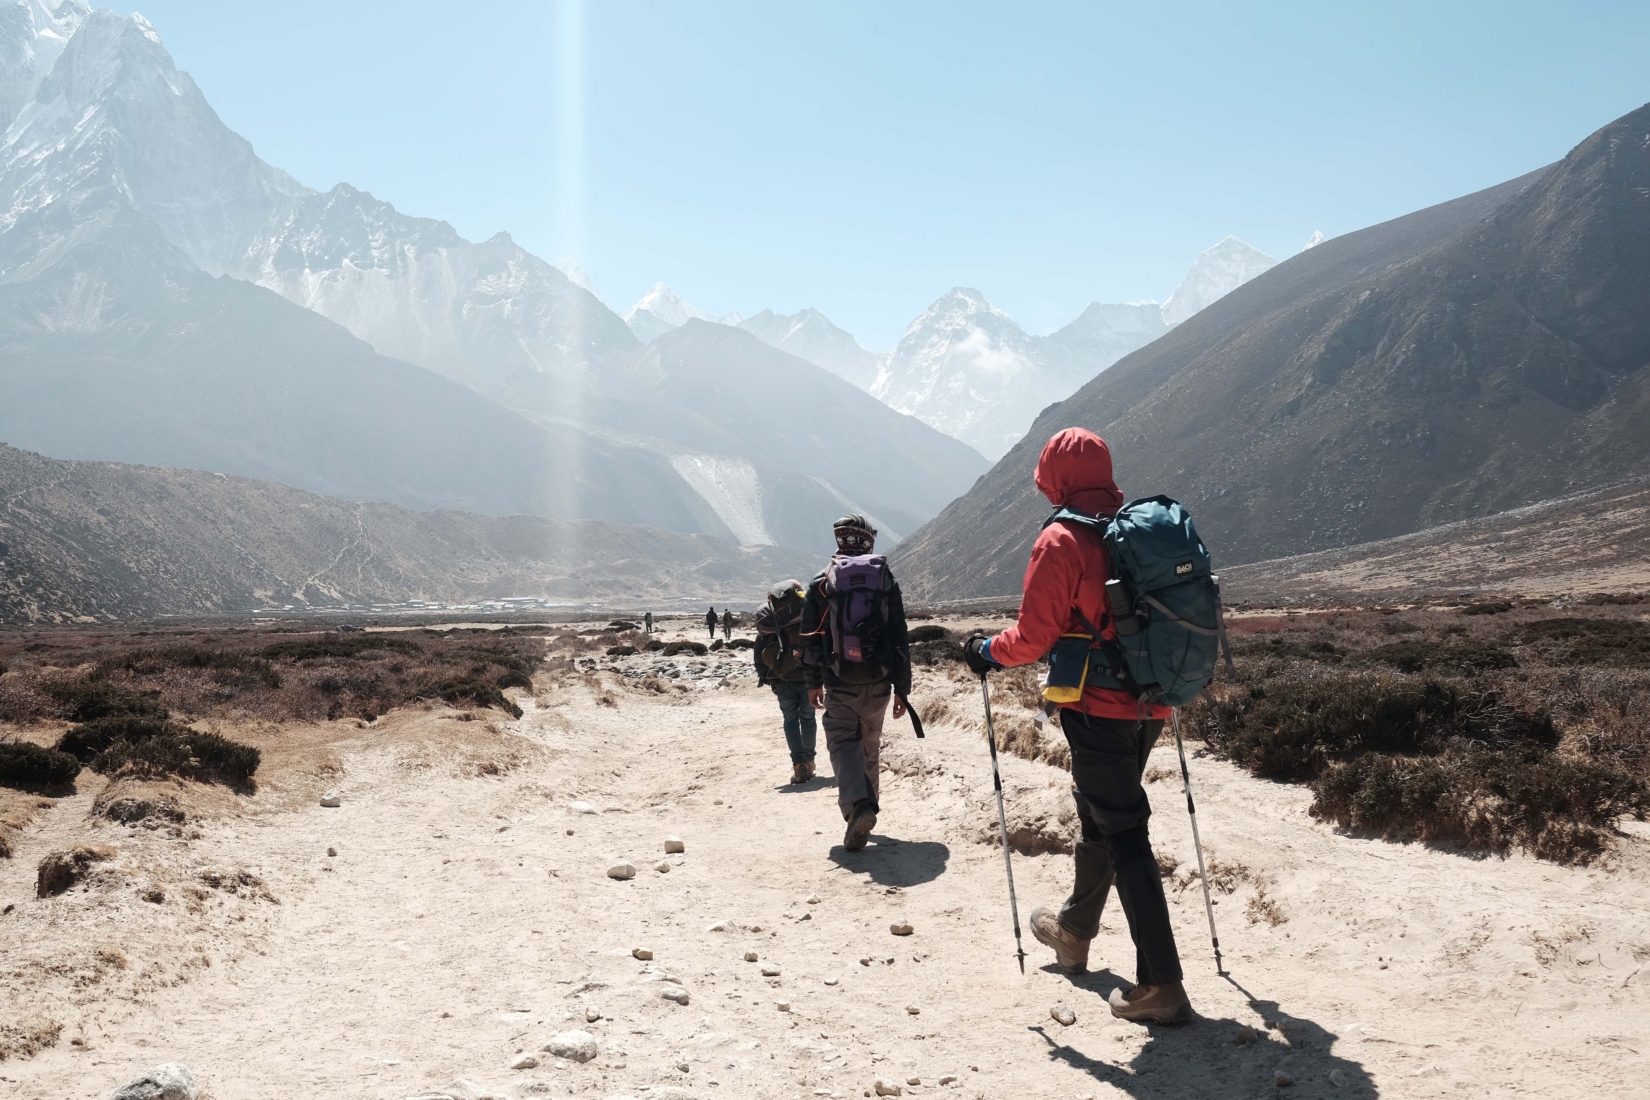 Several hikers with backpacks trekking on the trail to Everest Base Camp in Nepal